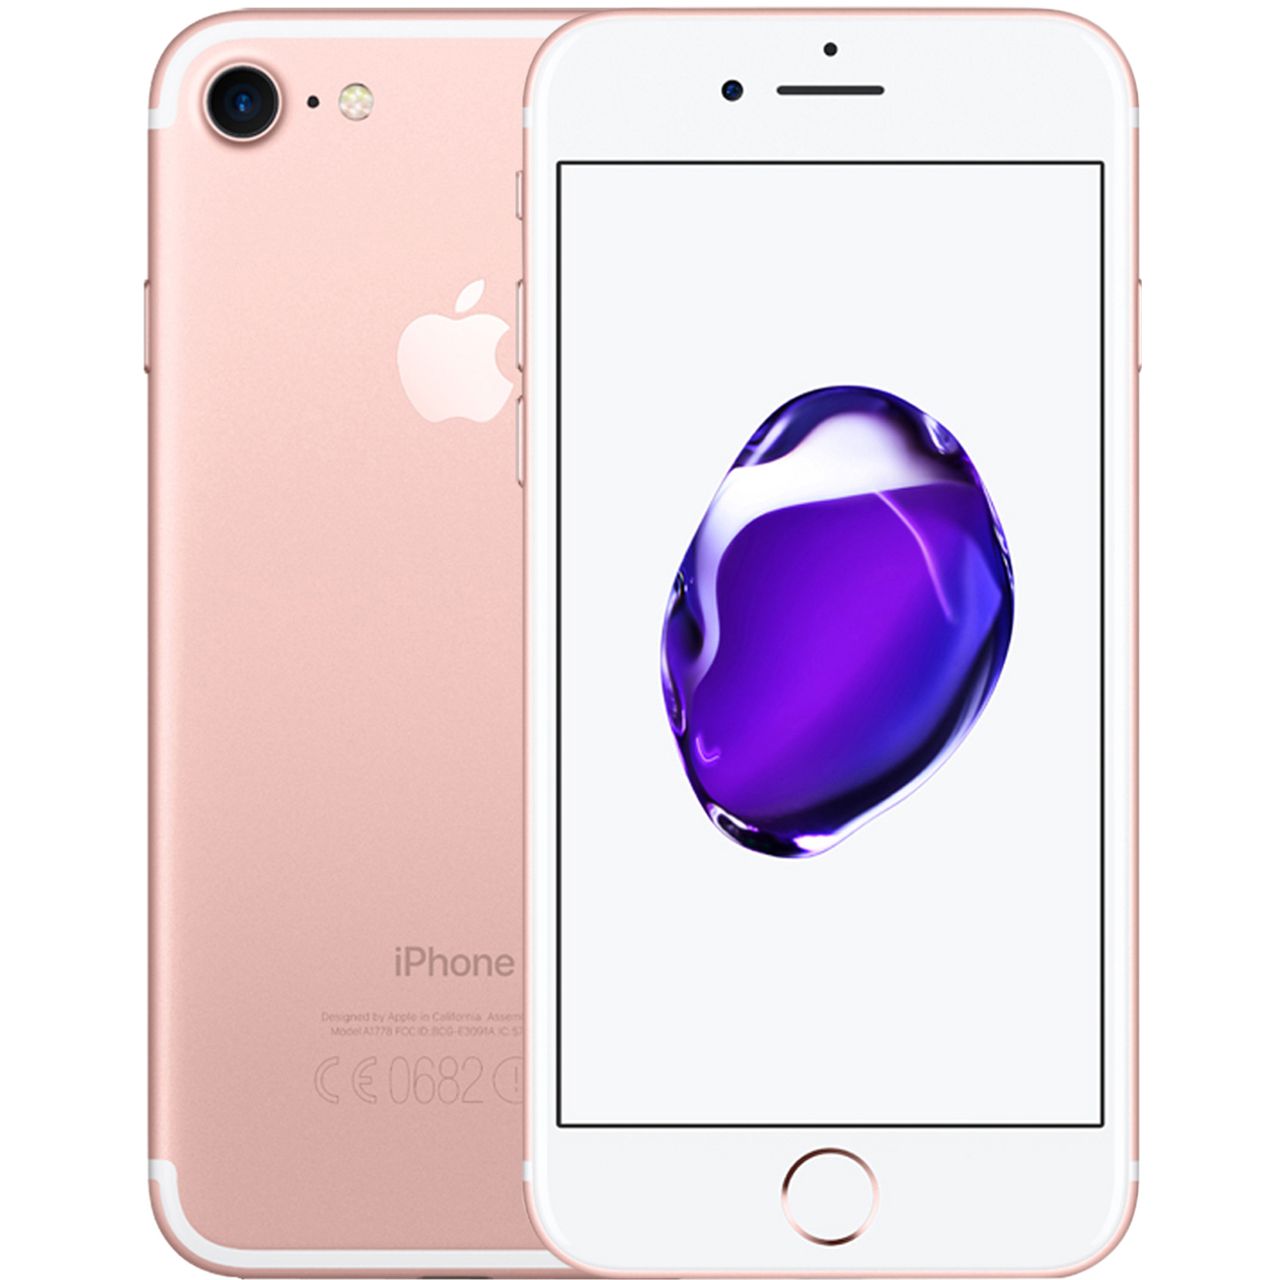 Apple iPhone 7 32GB in Rose Gold Review